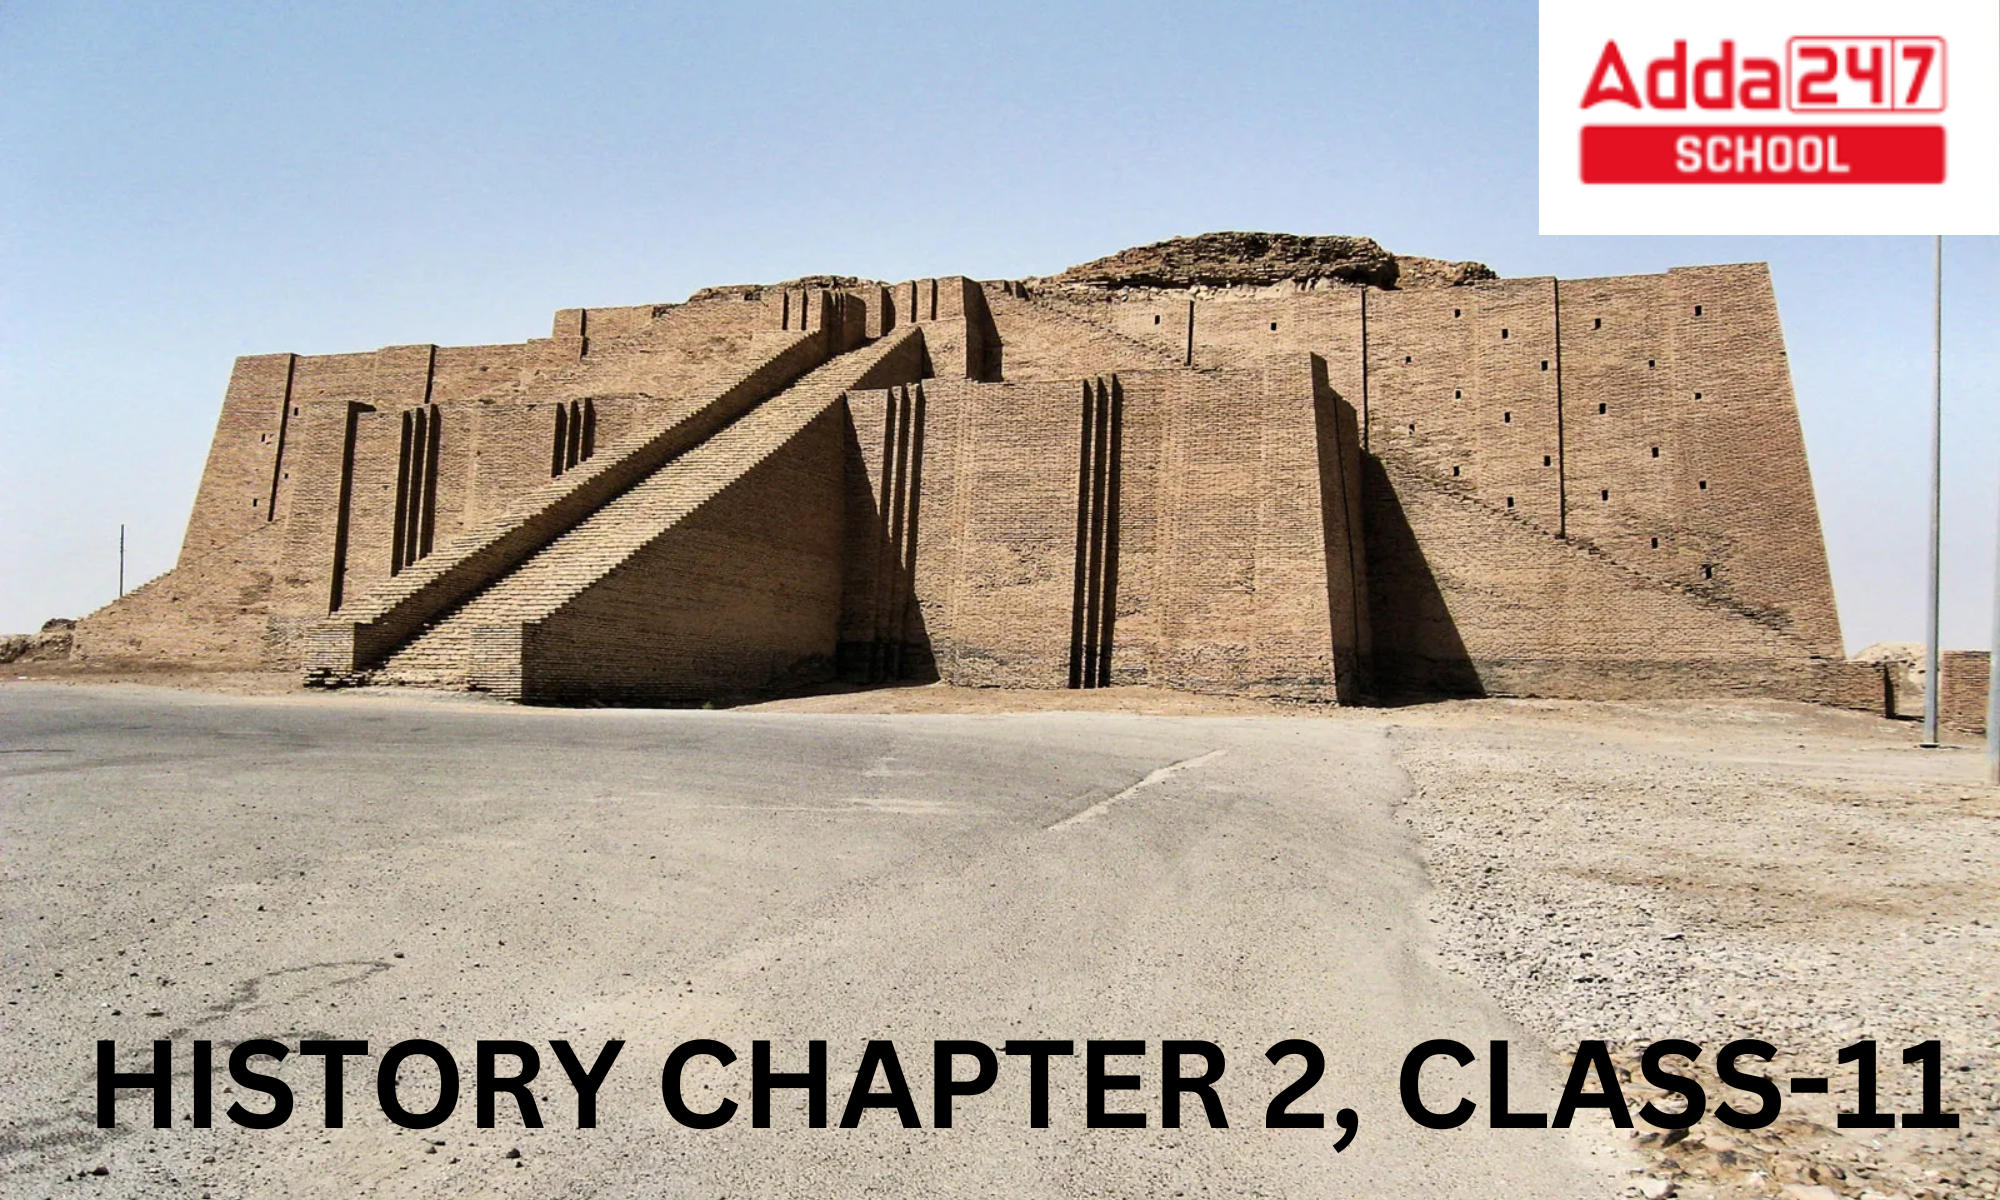 Class 11 History Chapter 2- Writing and City Life